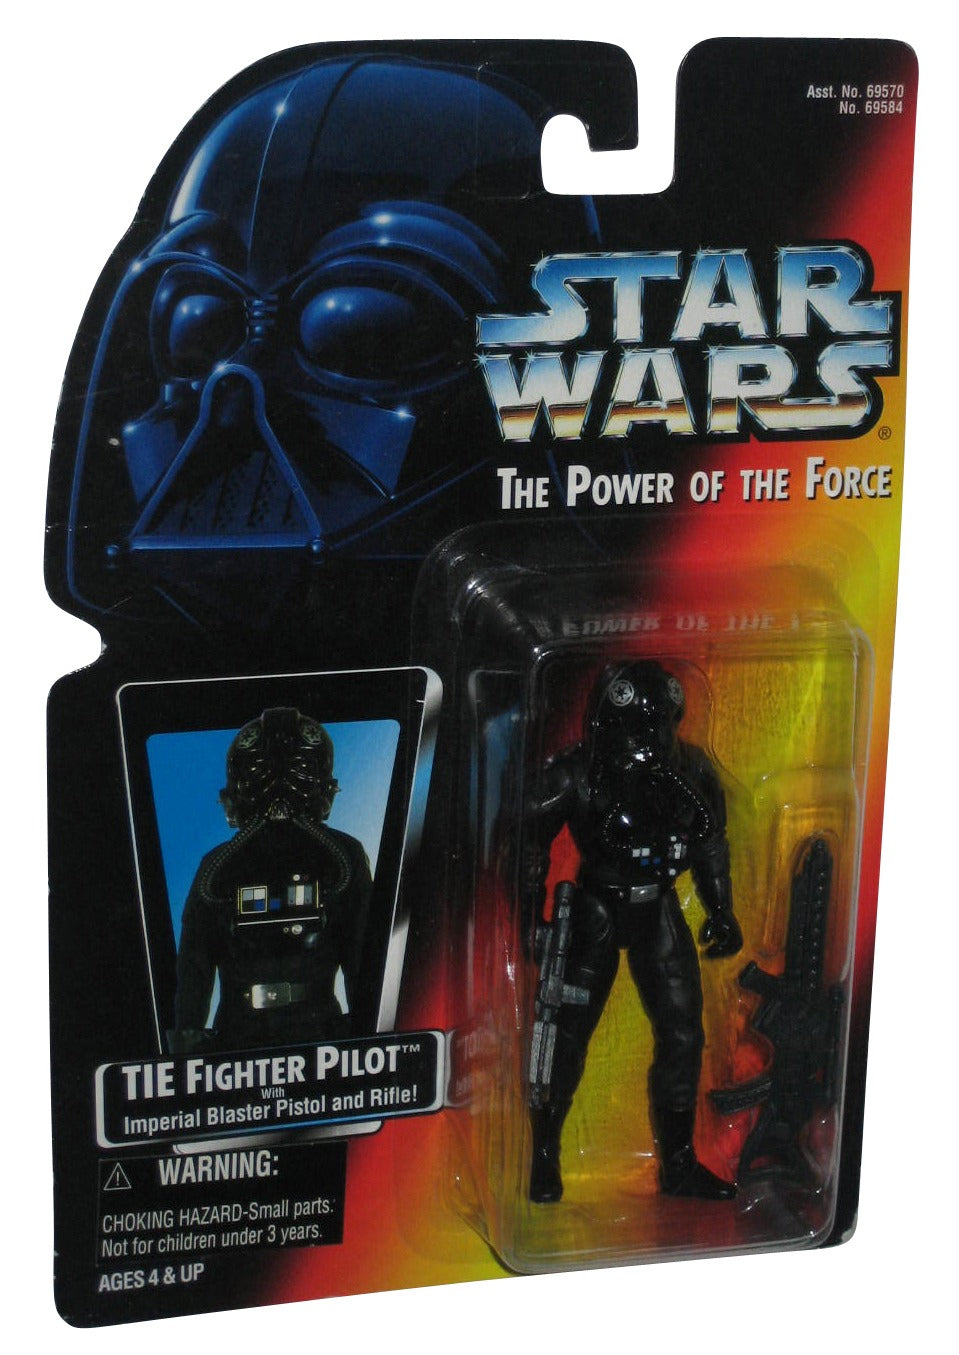 Kenner Star Wars Power of the Force TIE Fighter Pilot 3.75" Figure